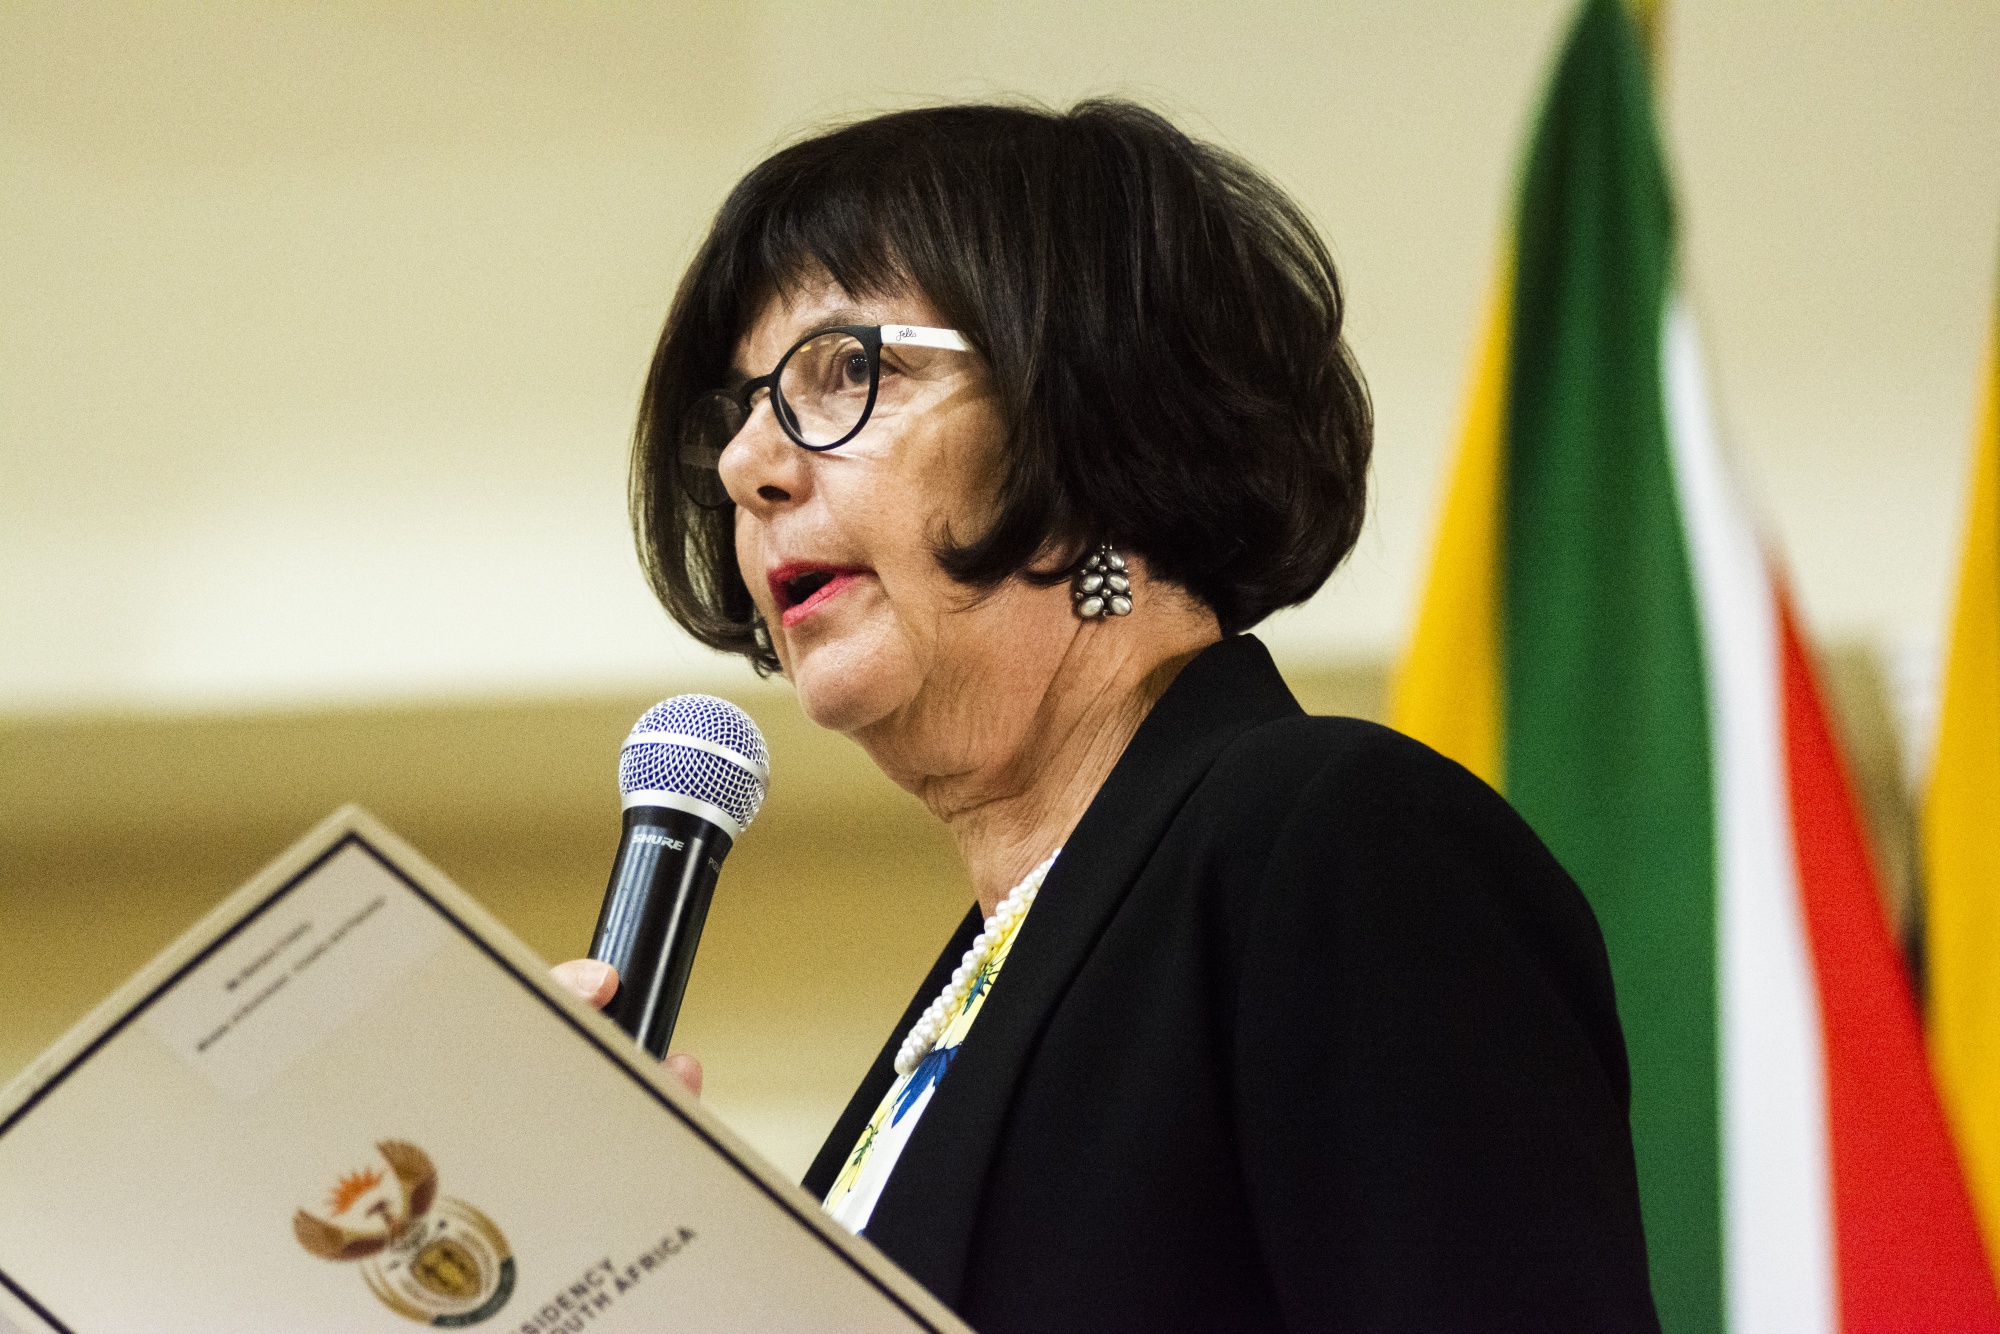 Barbara Creecy, South Africa's environment, forestry and fisheries minister, speaks during a swearing-in ceremony in Pretoria, South Africa, on Thursday, May 30, 2019. Now that South Africa's cabinet has been announced, the rand may join its emerging-market peers in being whipsawed by a trade war that has subdued markets worldwide.